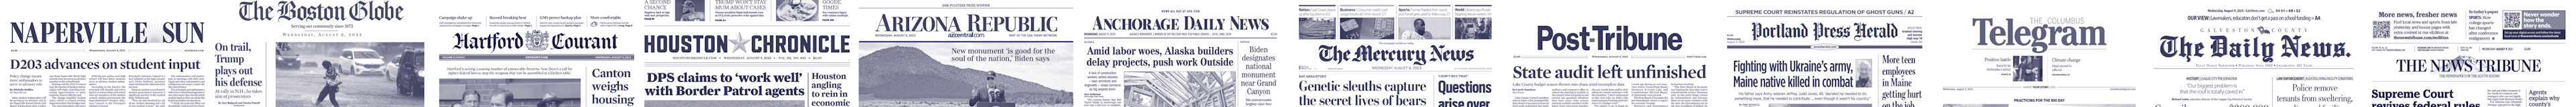 Image of many newspaper front pages tiled